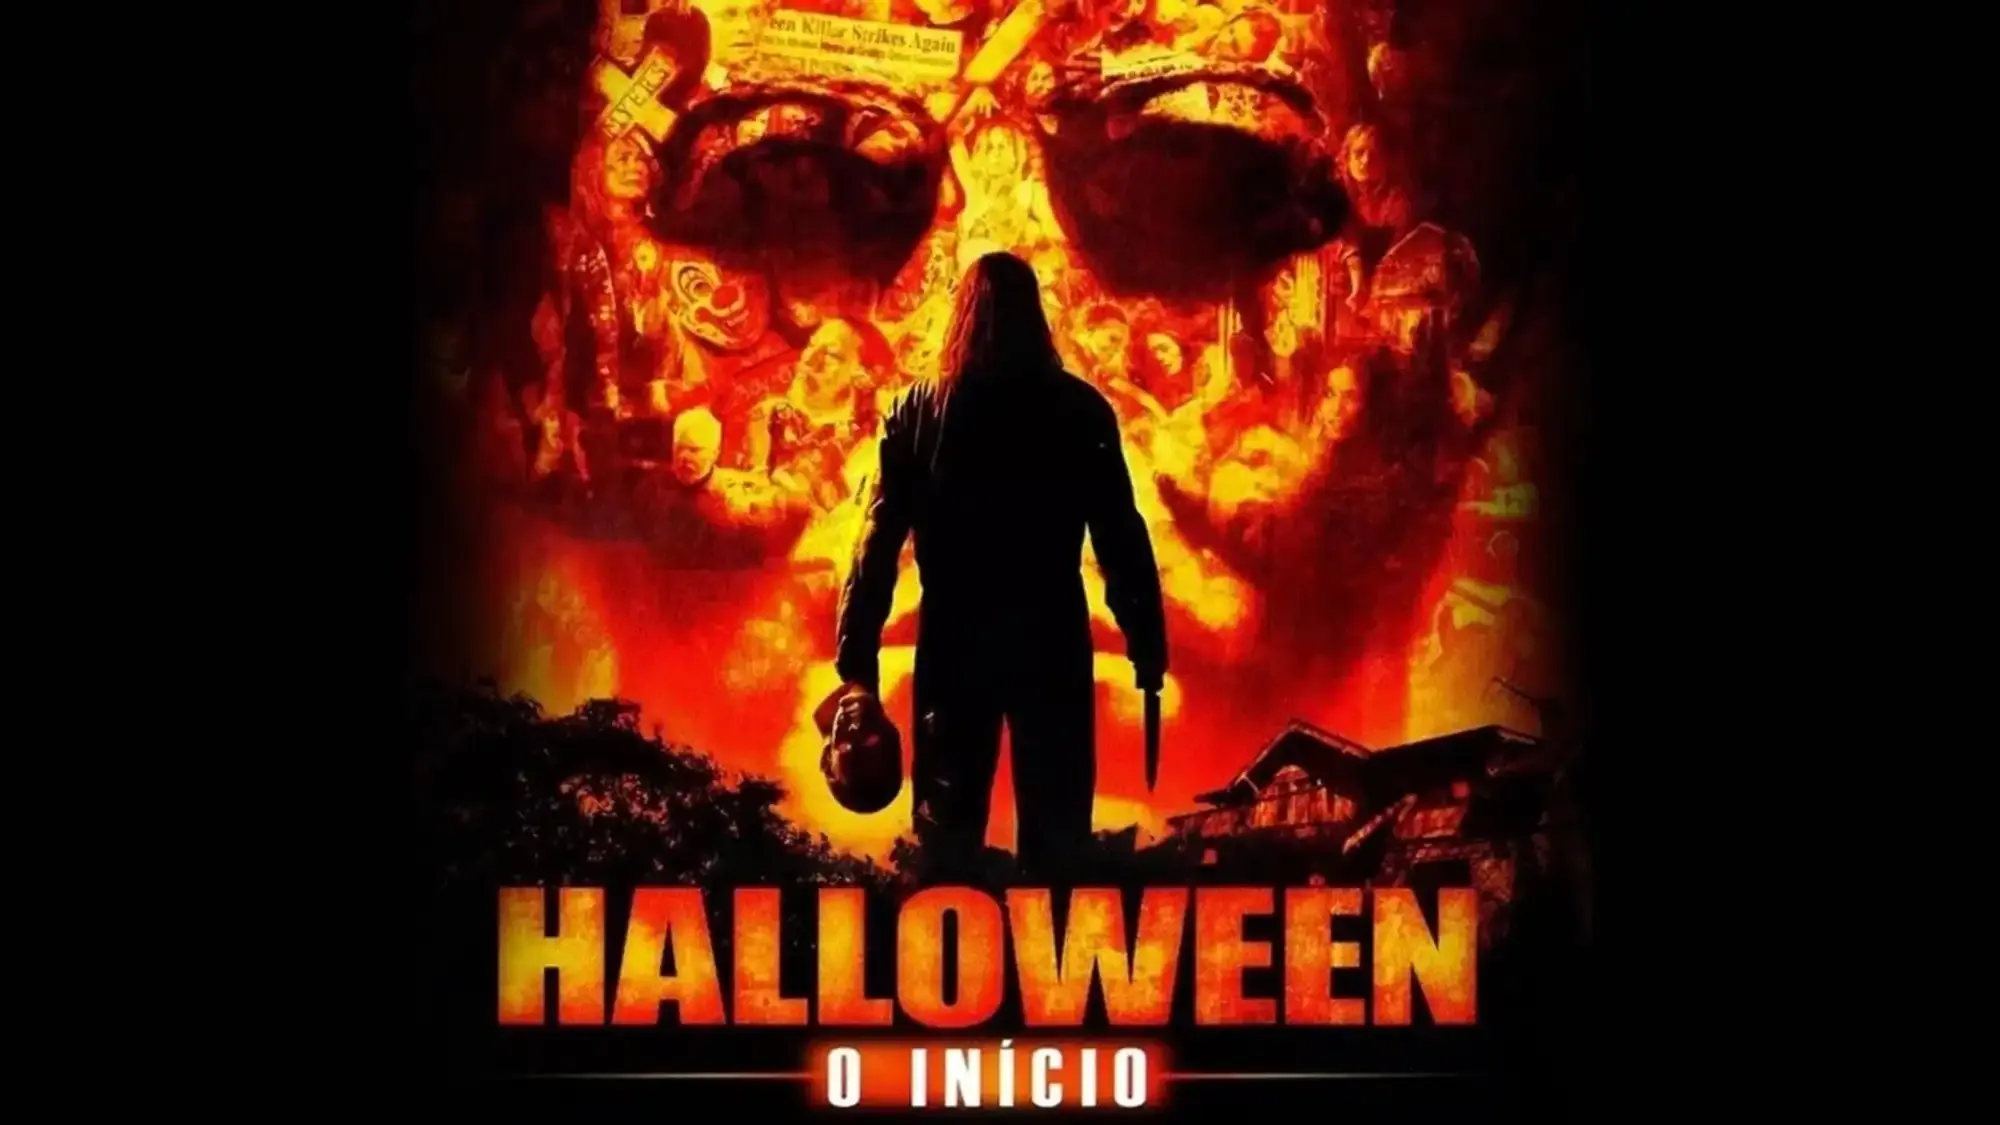 Halloween movie review